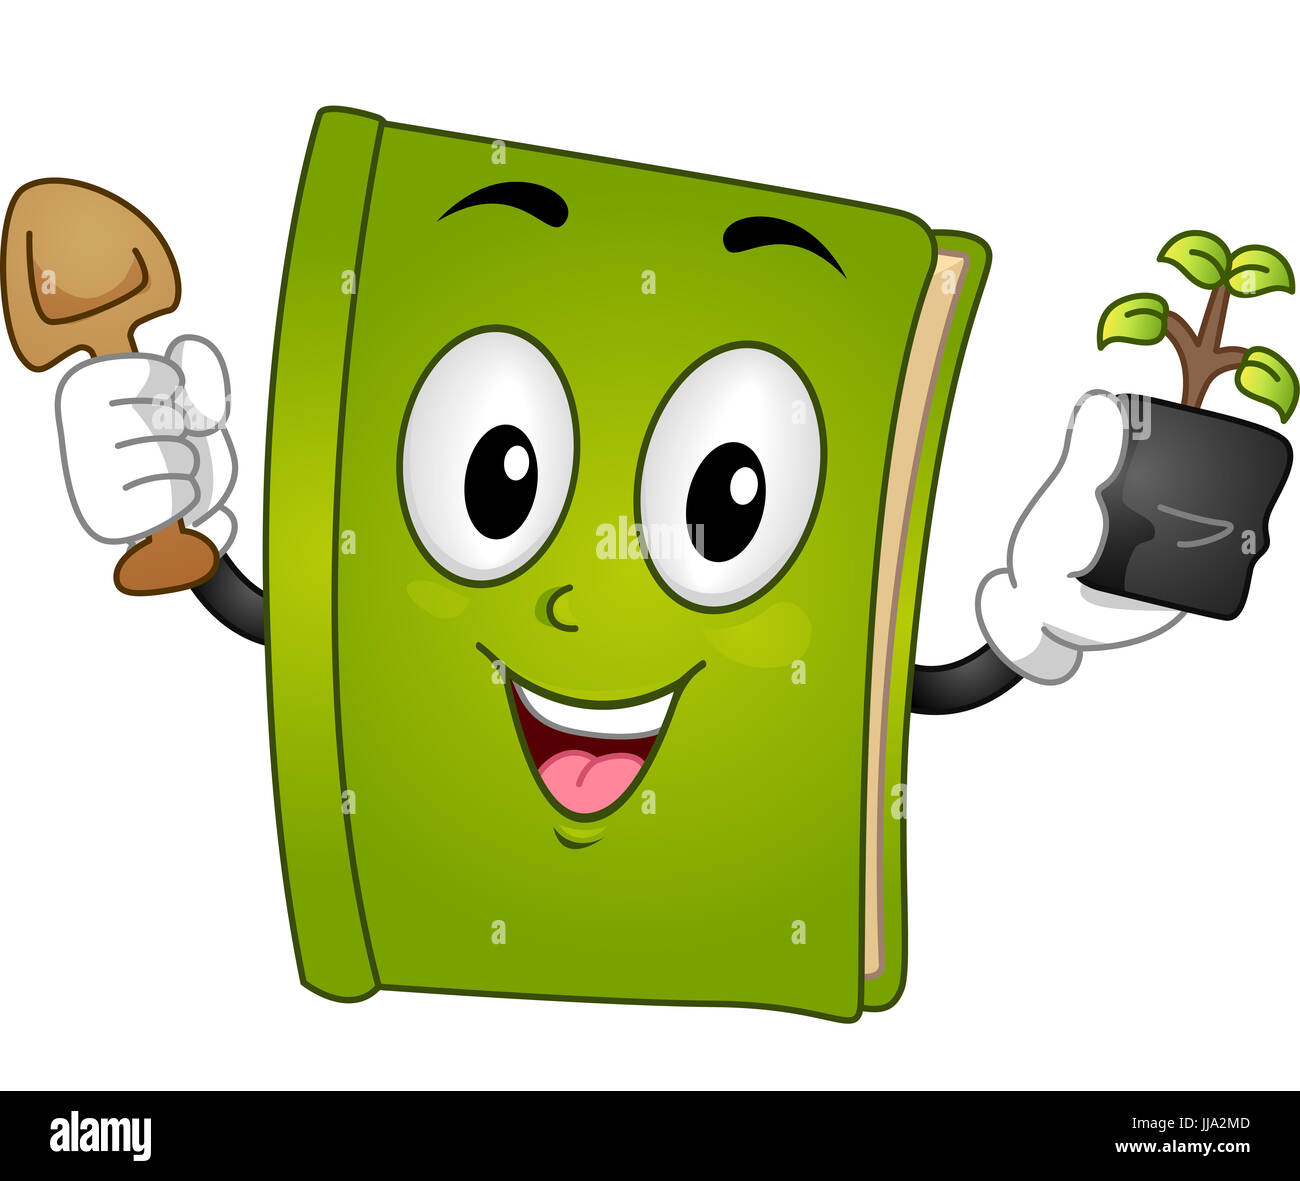 Mascot Illustration of a Green Book Holding a Trowel in One Hand and a Sapling in the Other Stock Photo